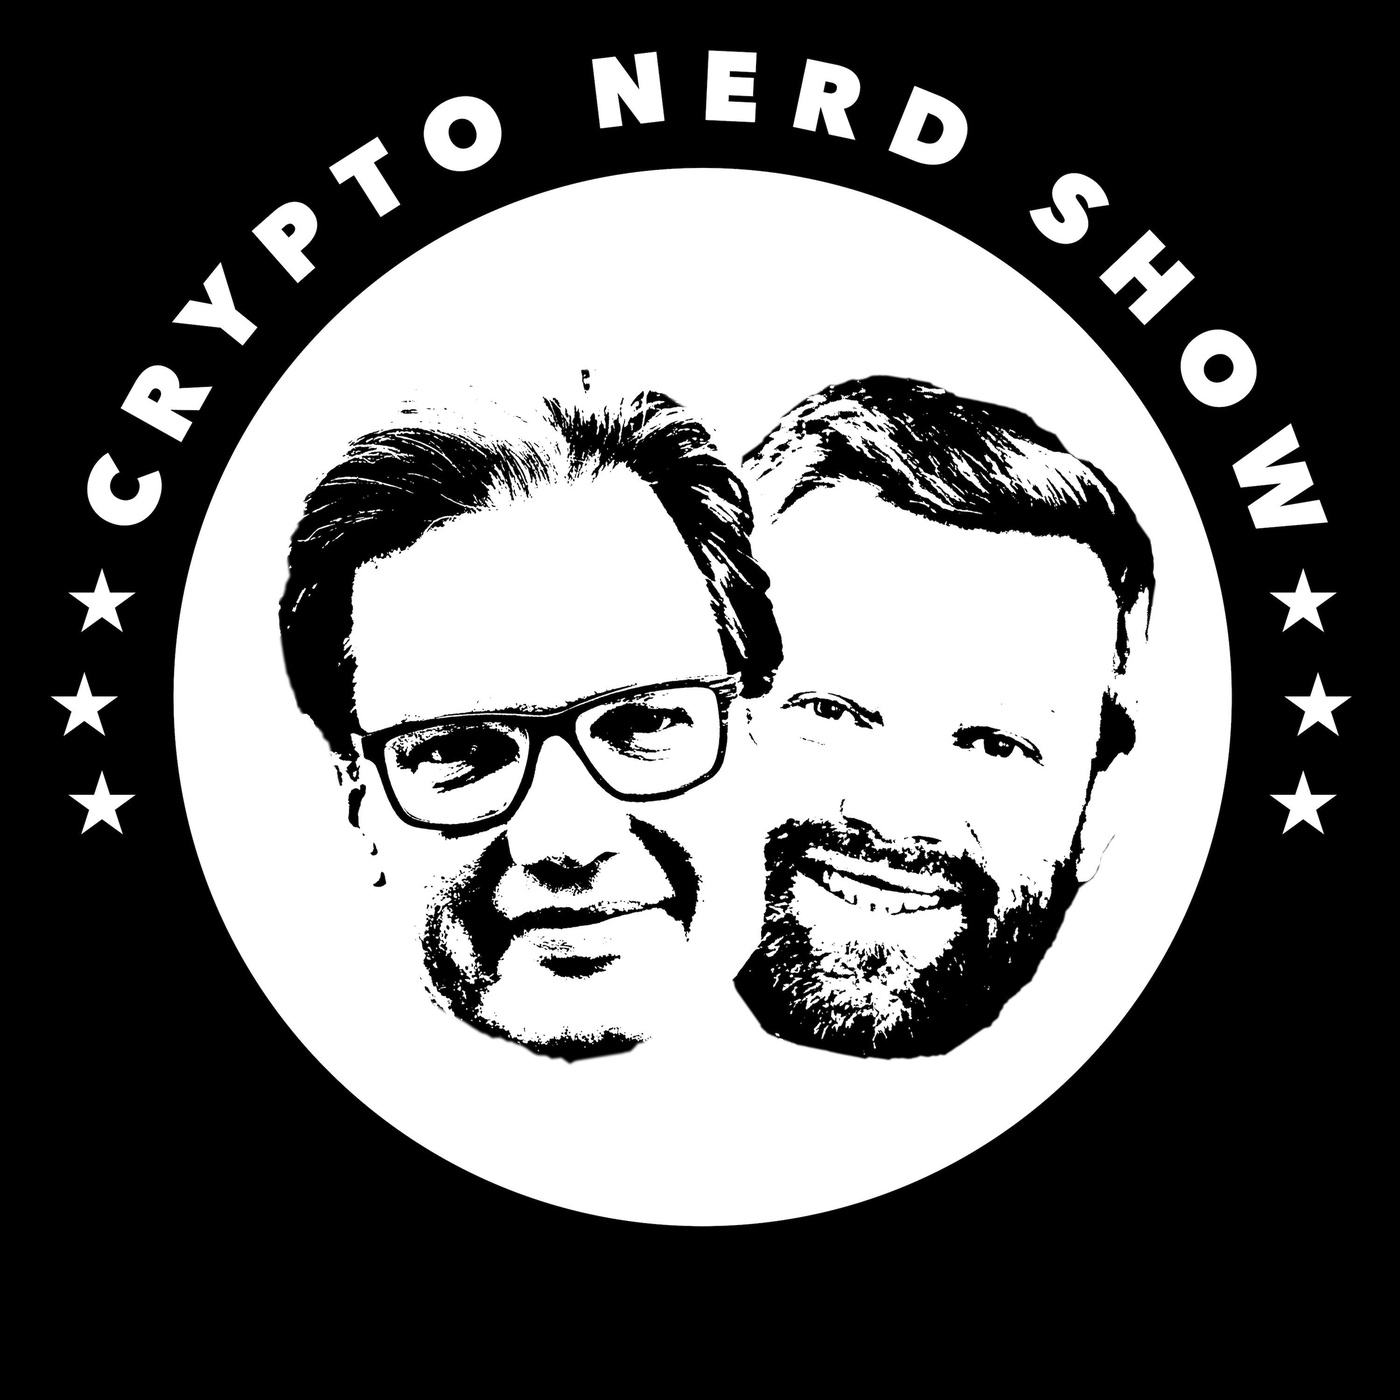 Die Crypto Nerd Show #36 - Welcome Back